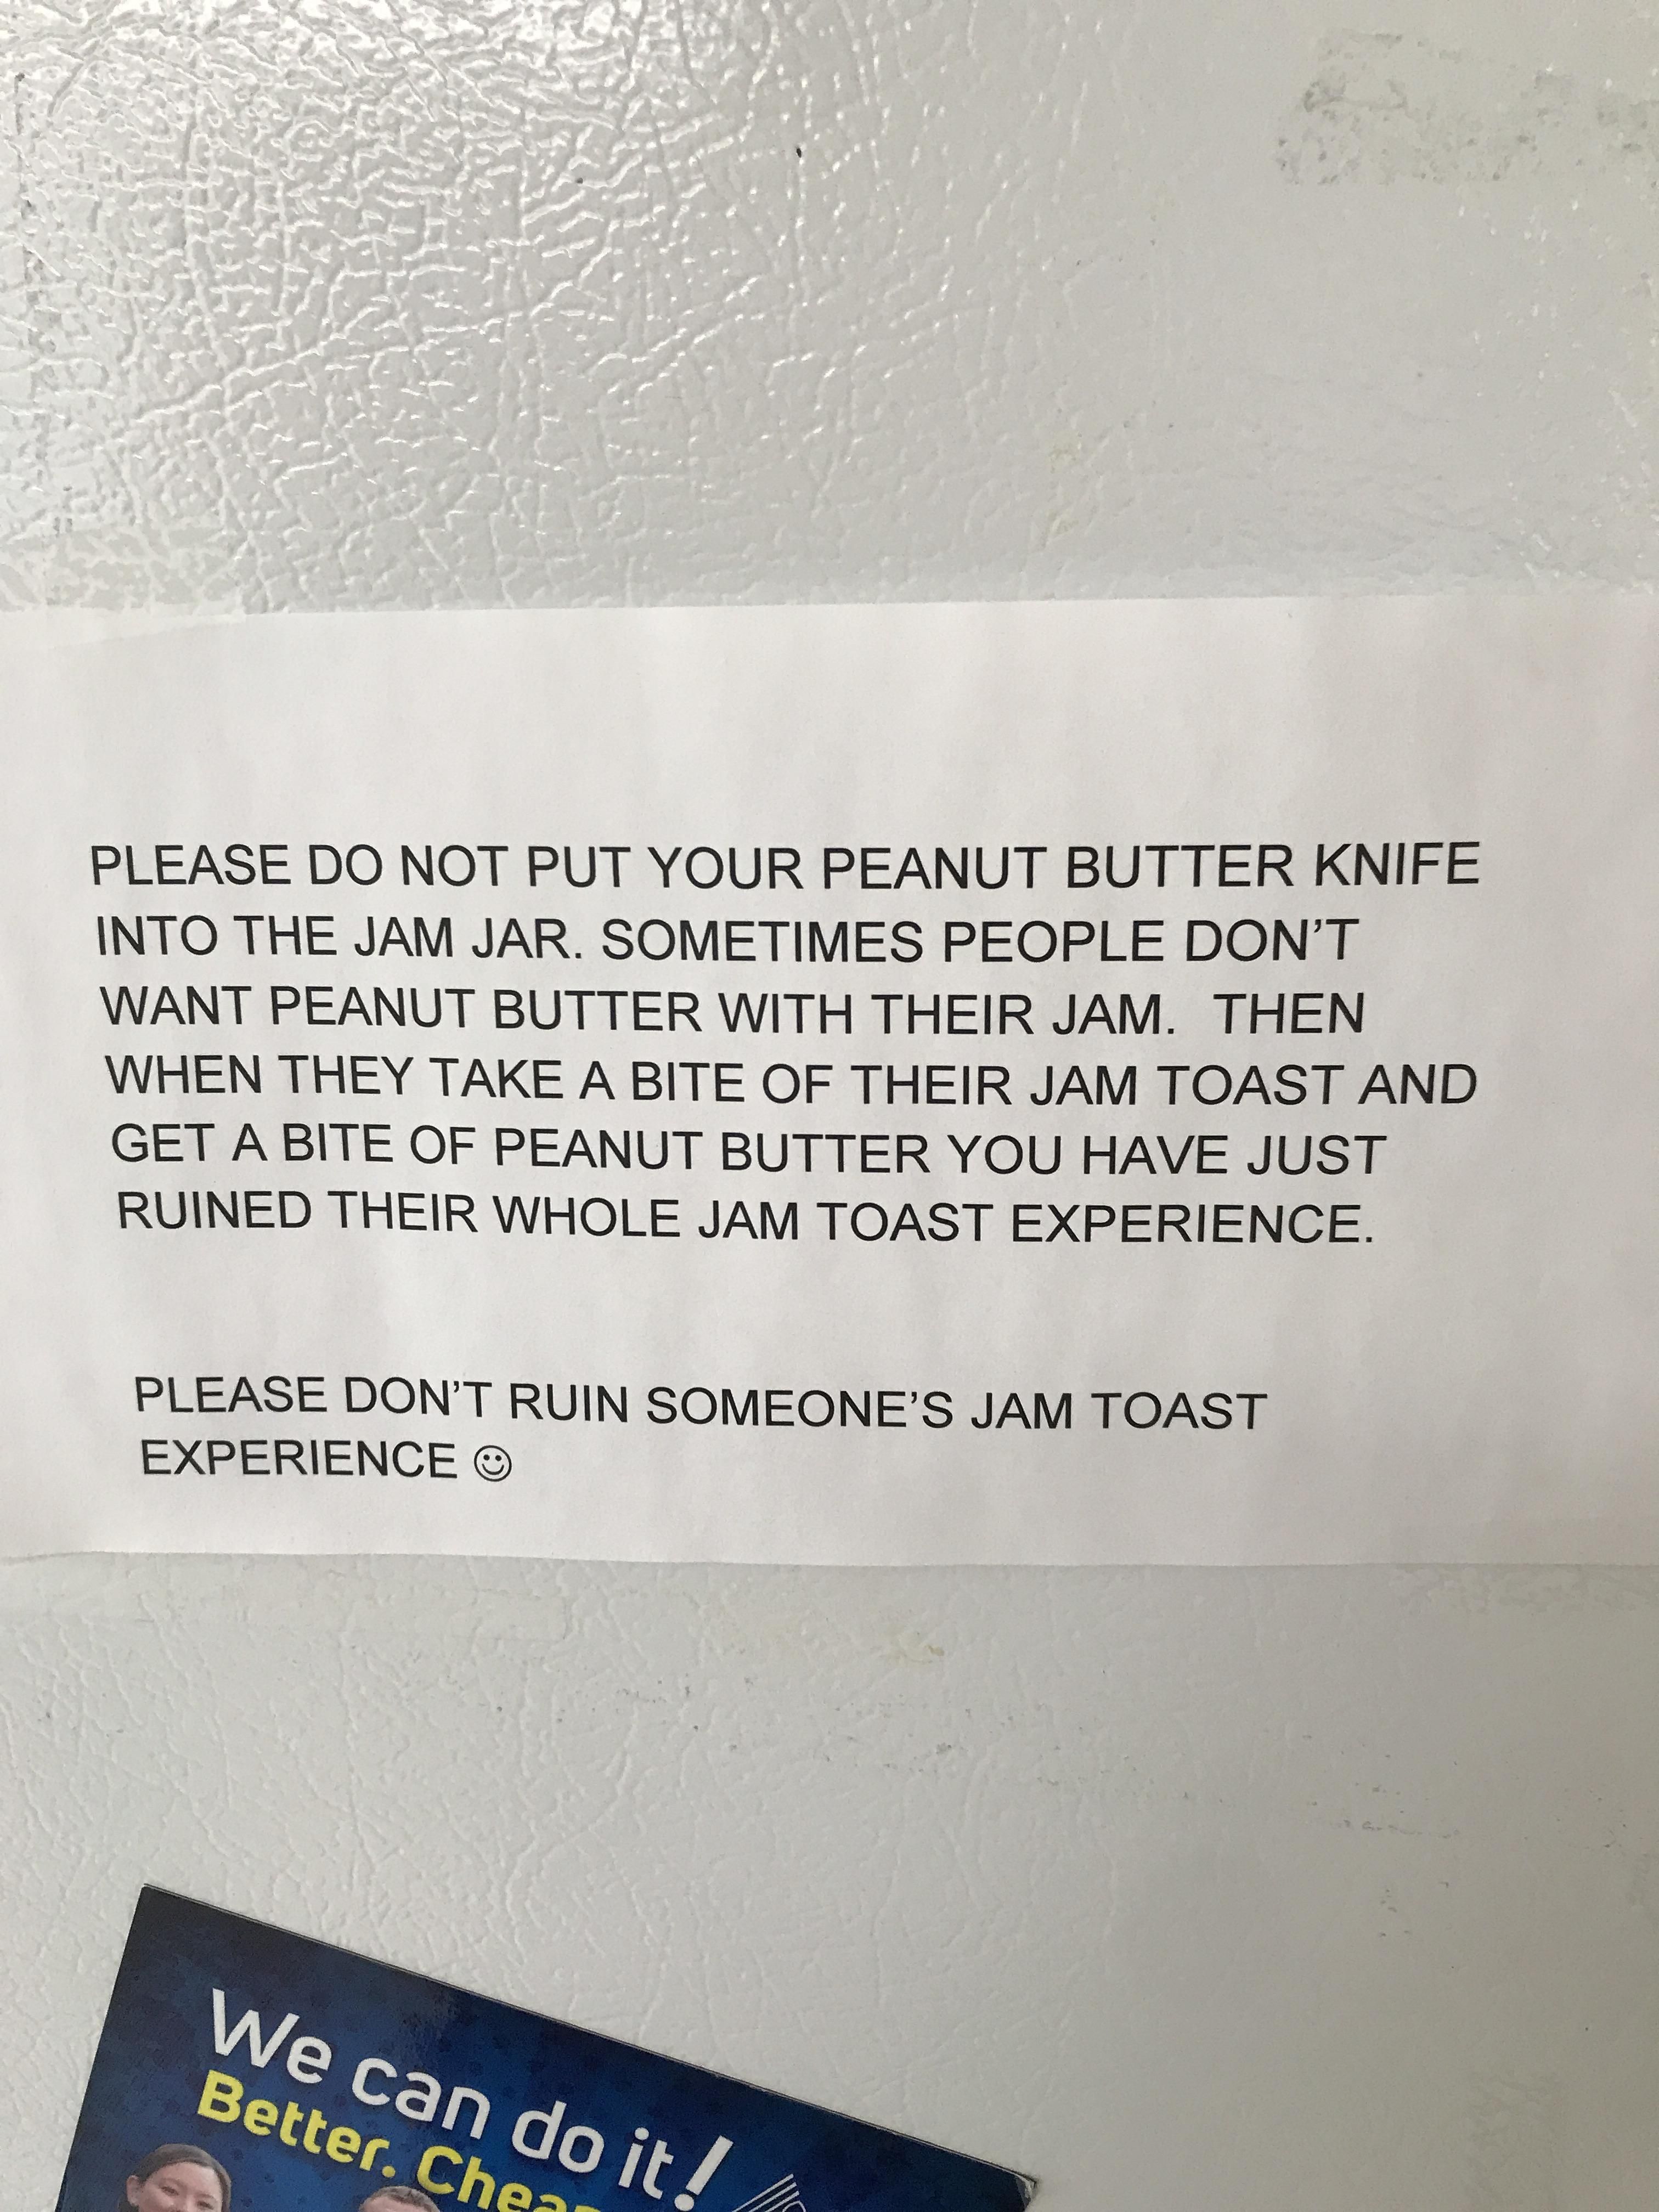 This sign on the fridge at work